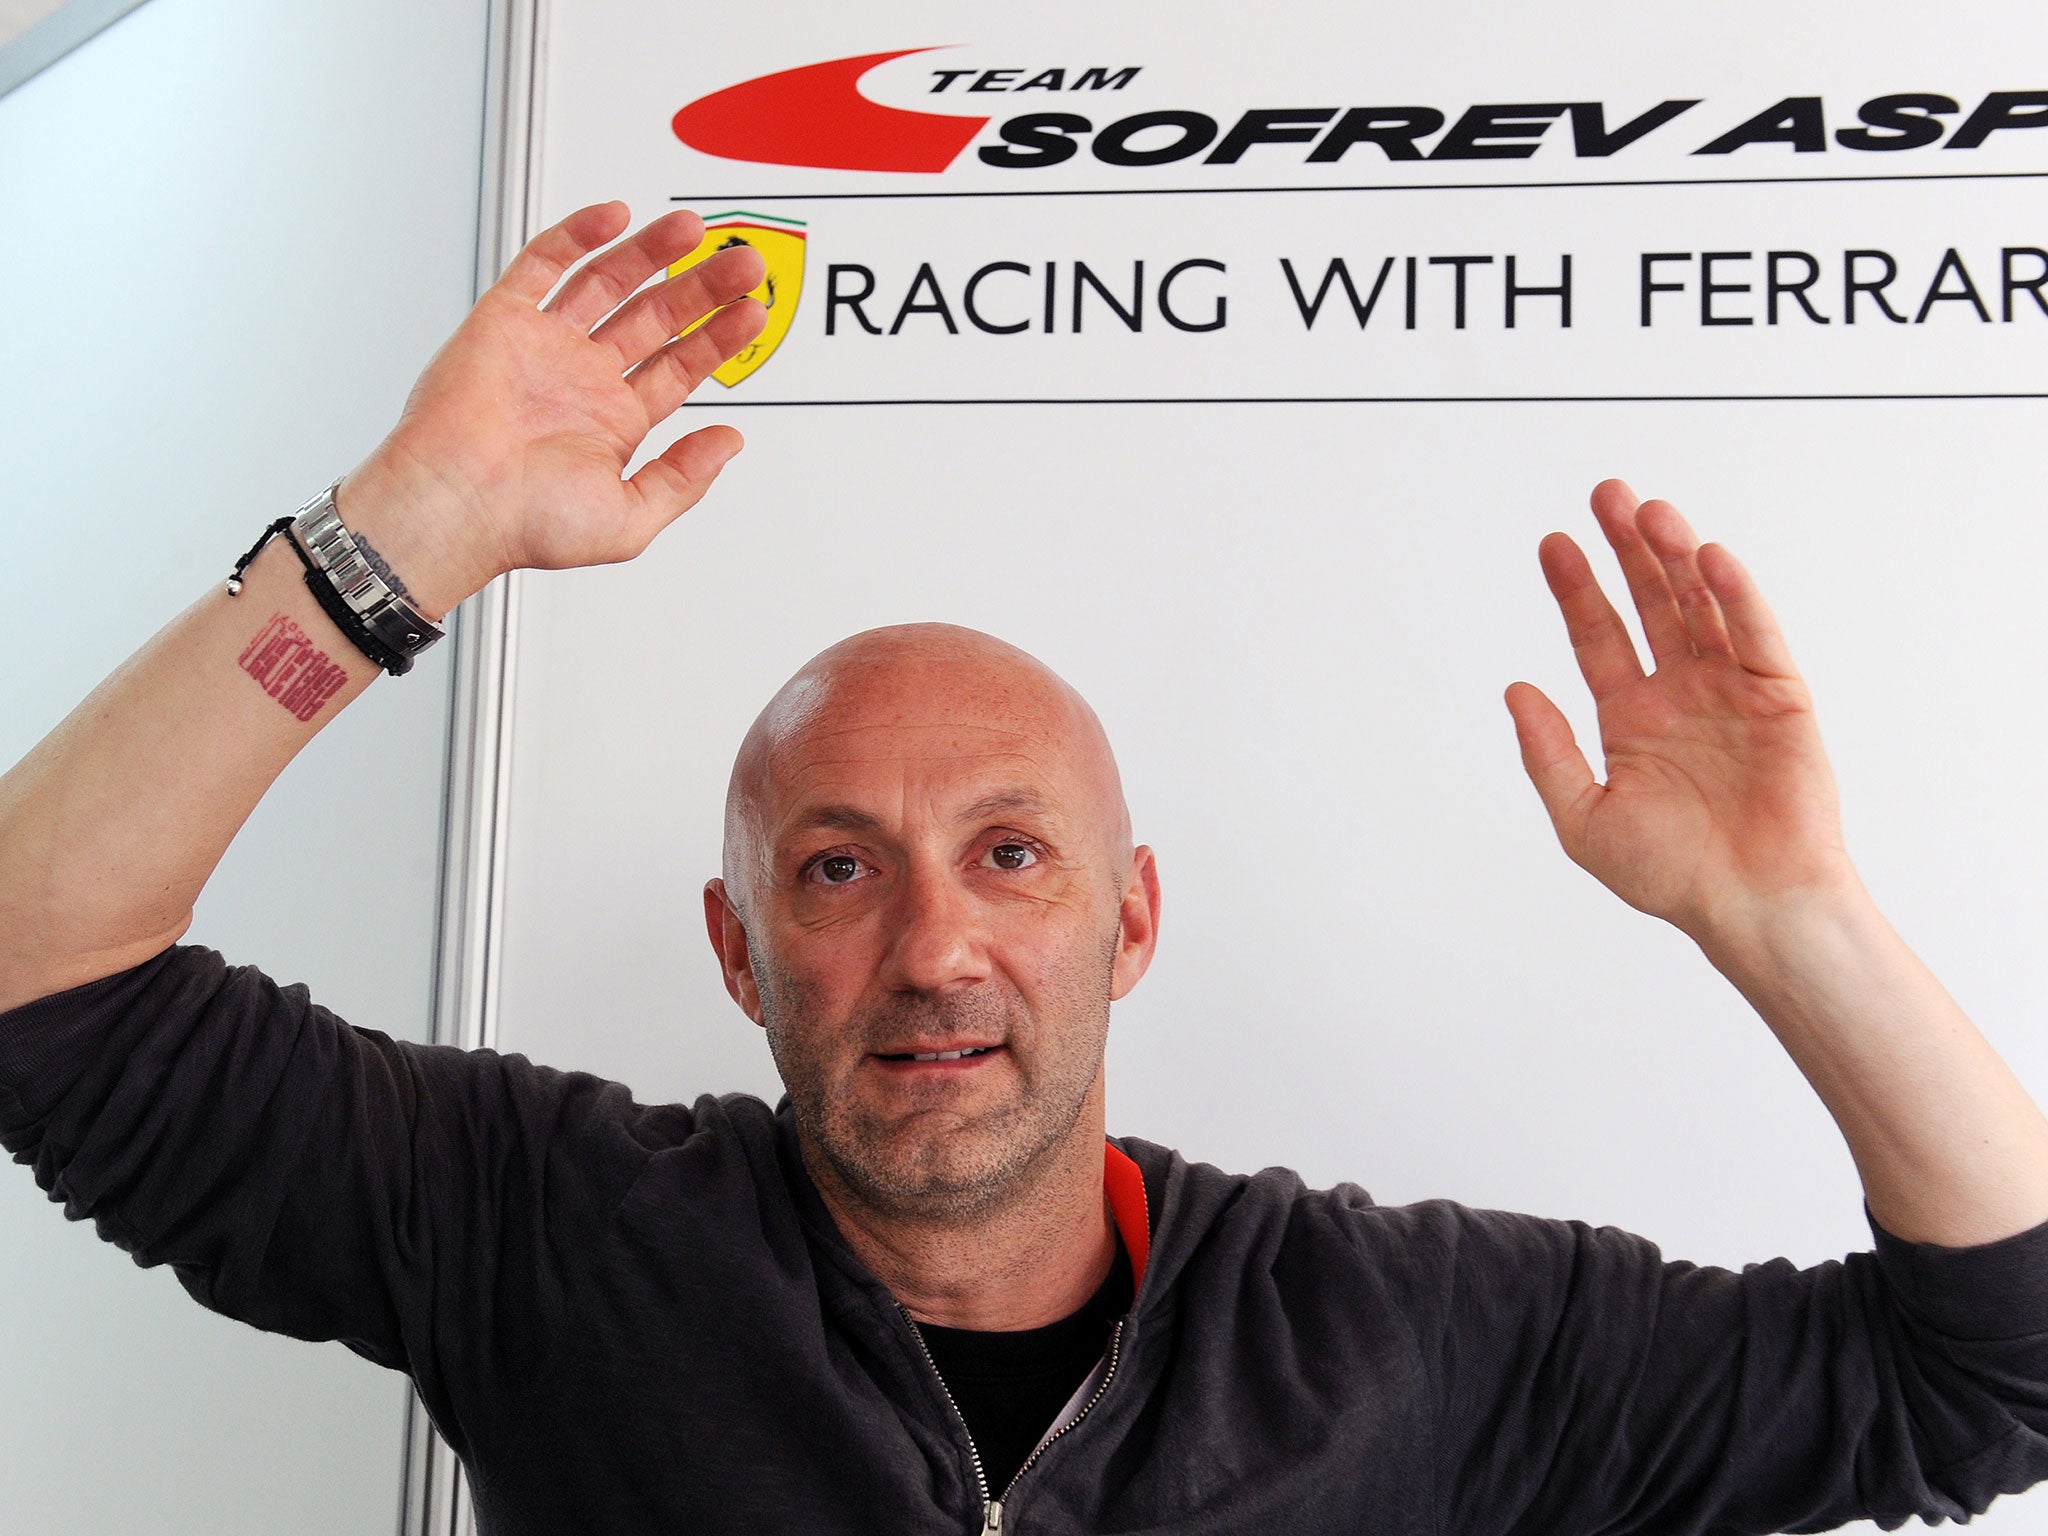 France's soccer team former goalkeeper and 1998 World Cup winner Fabien Barthez, driving the Ferrari 458 Italia N°58, speaks during a press conference on June 13, 2014 in Le Mans